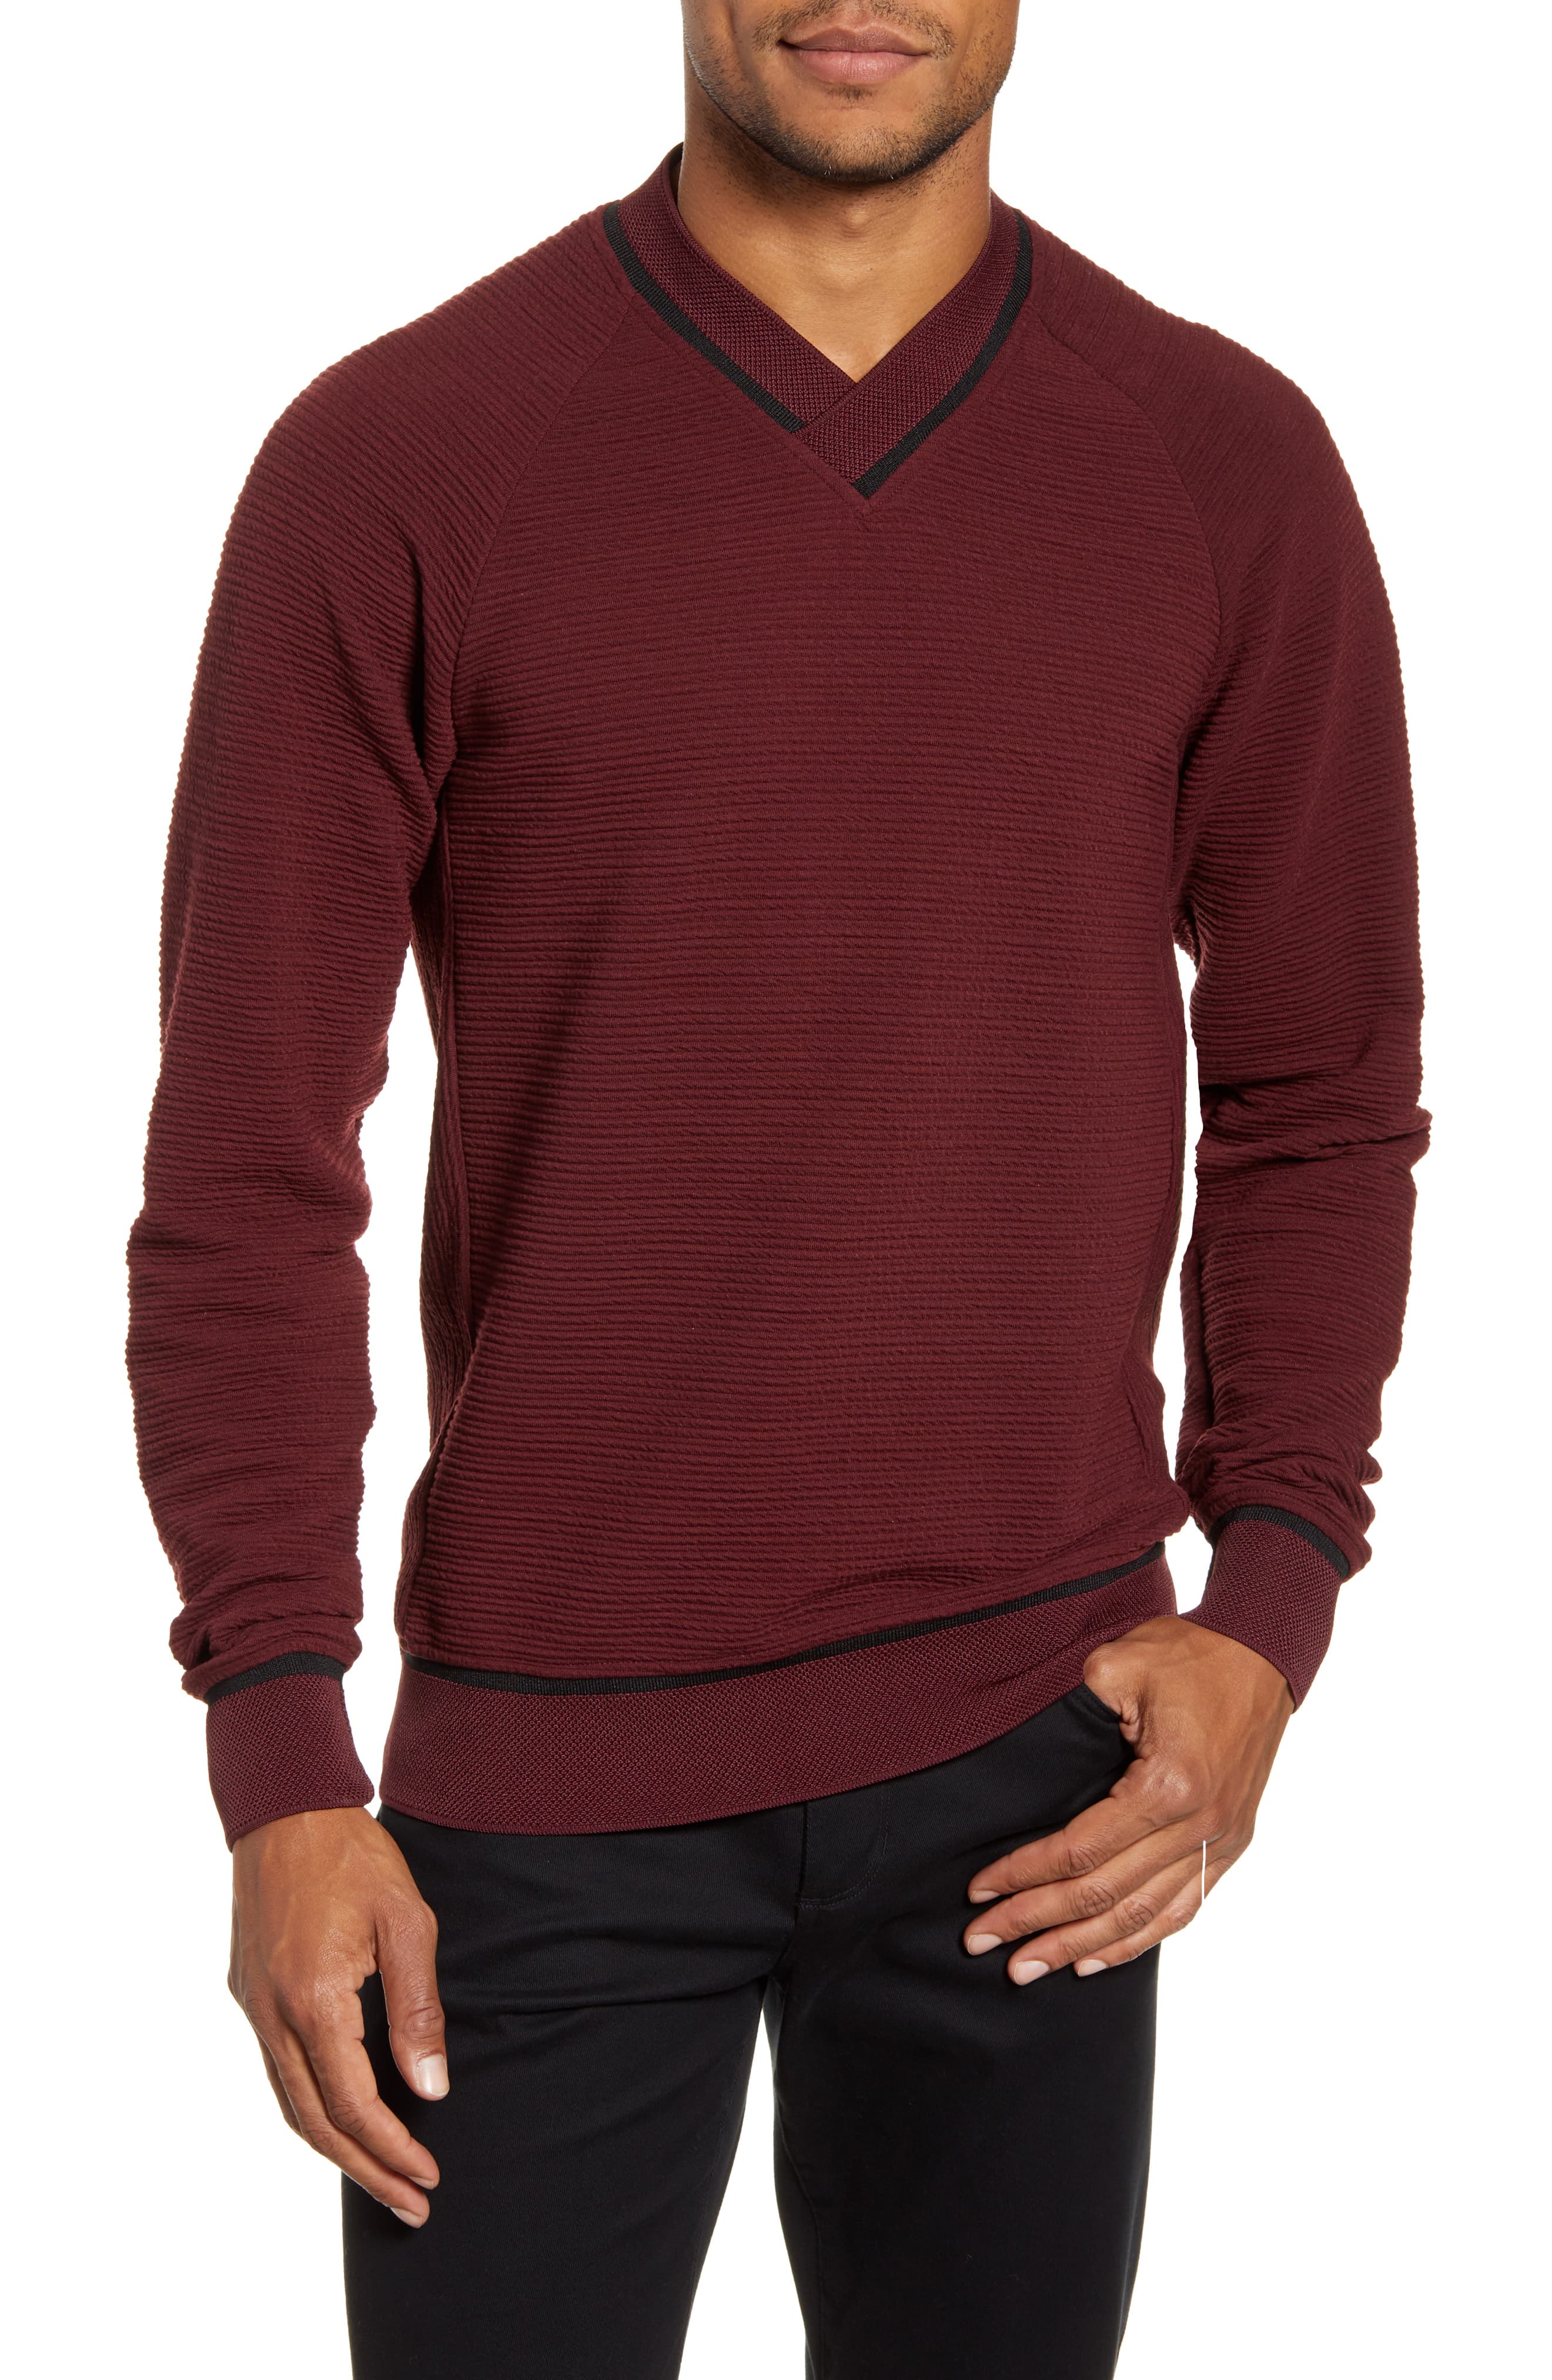 Men’s Vince Camuto Slim Fit Crossover V-Neck Sweater, Size Small - Red ...